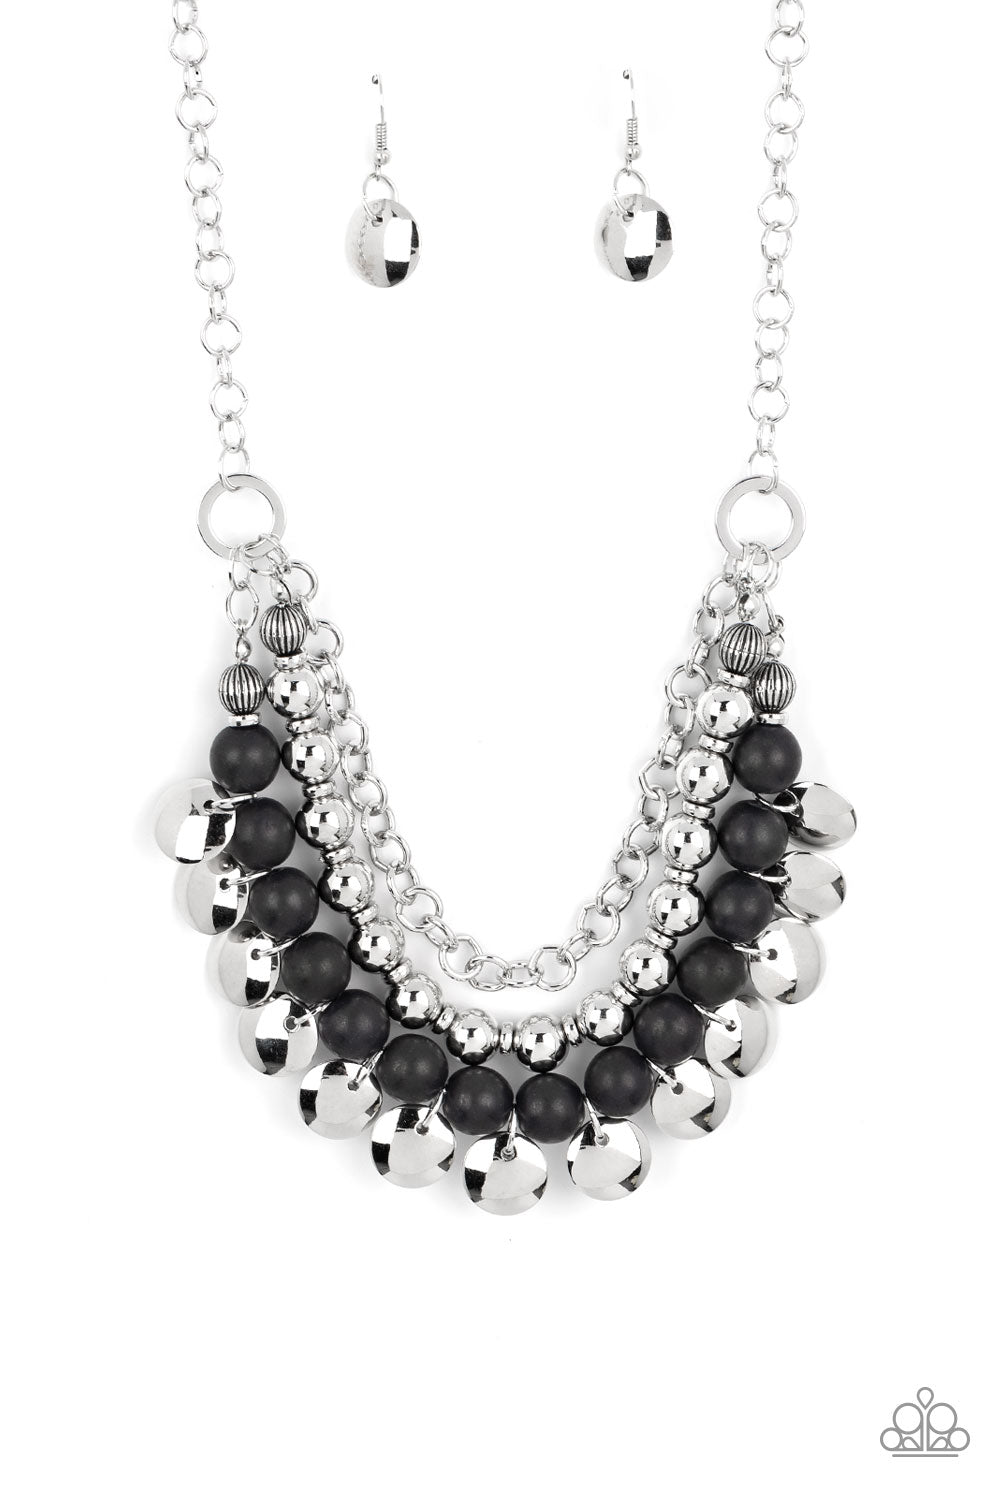 Paparazzi ♥ Leave Her Wild - Black ♥ Necklace